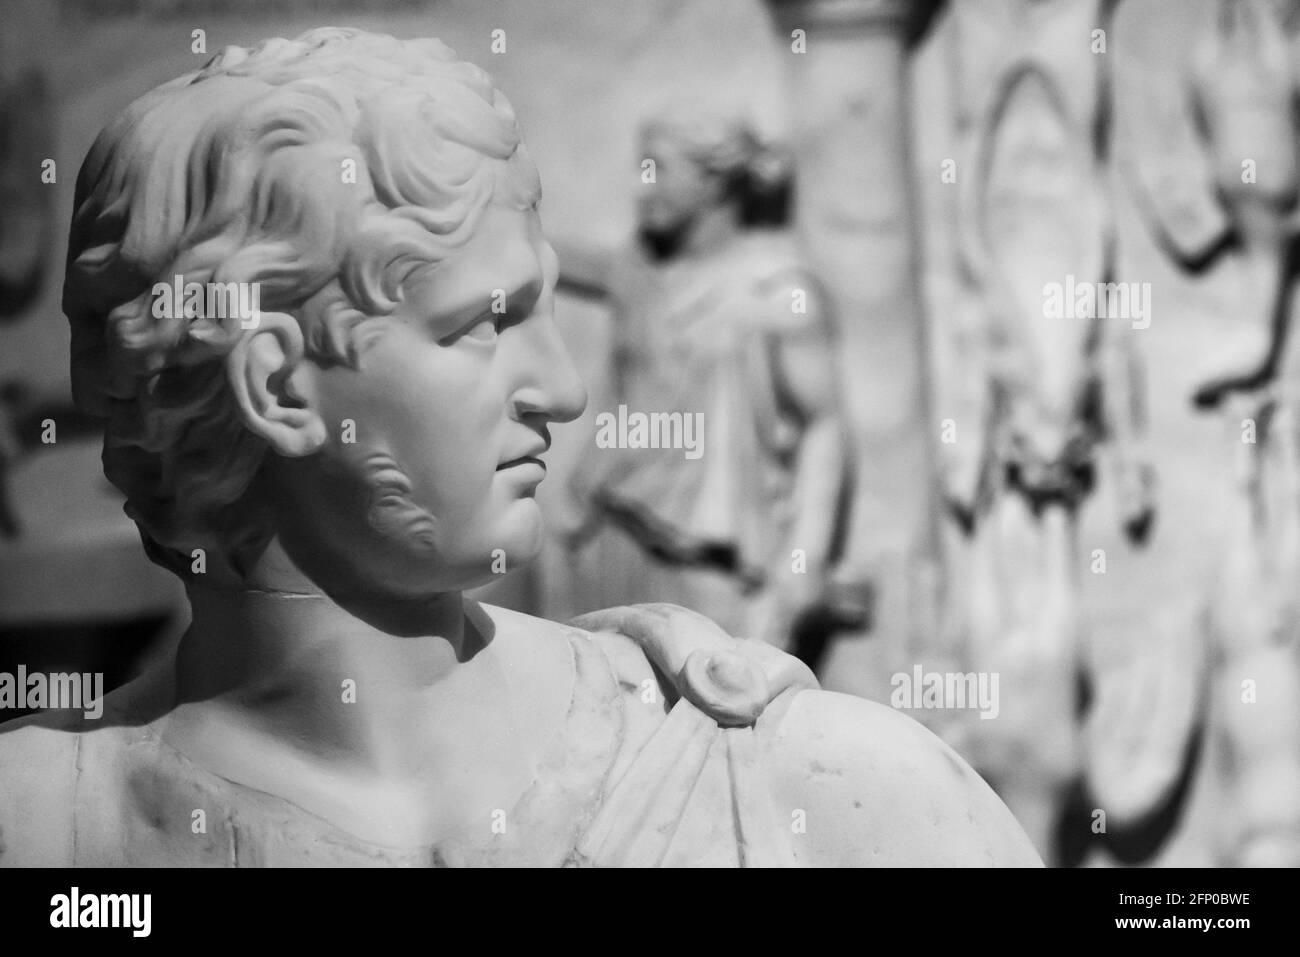 Black and white photo of ancient roman statue in close-up showing the handsome face of a young man in profile Stock Photo